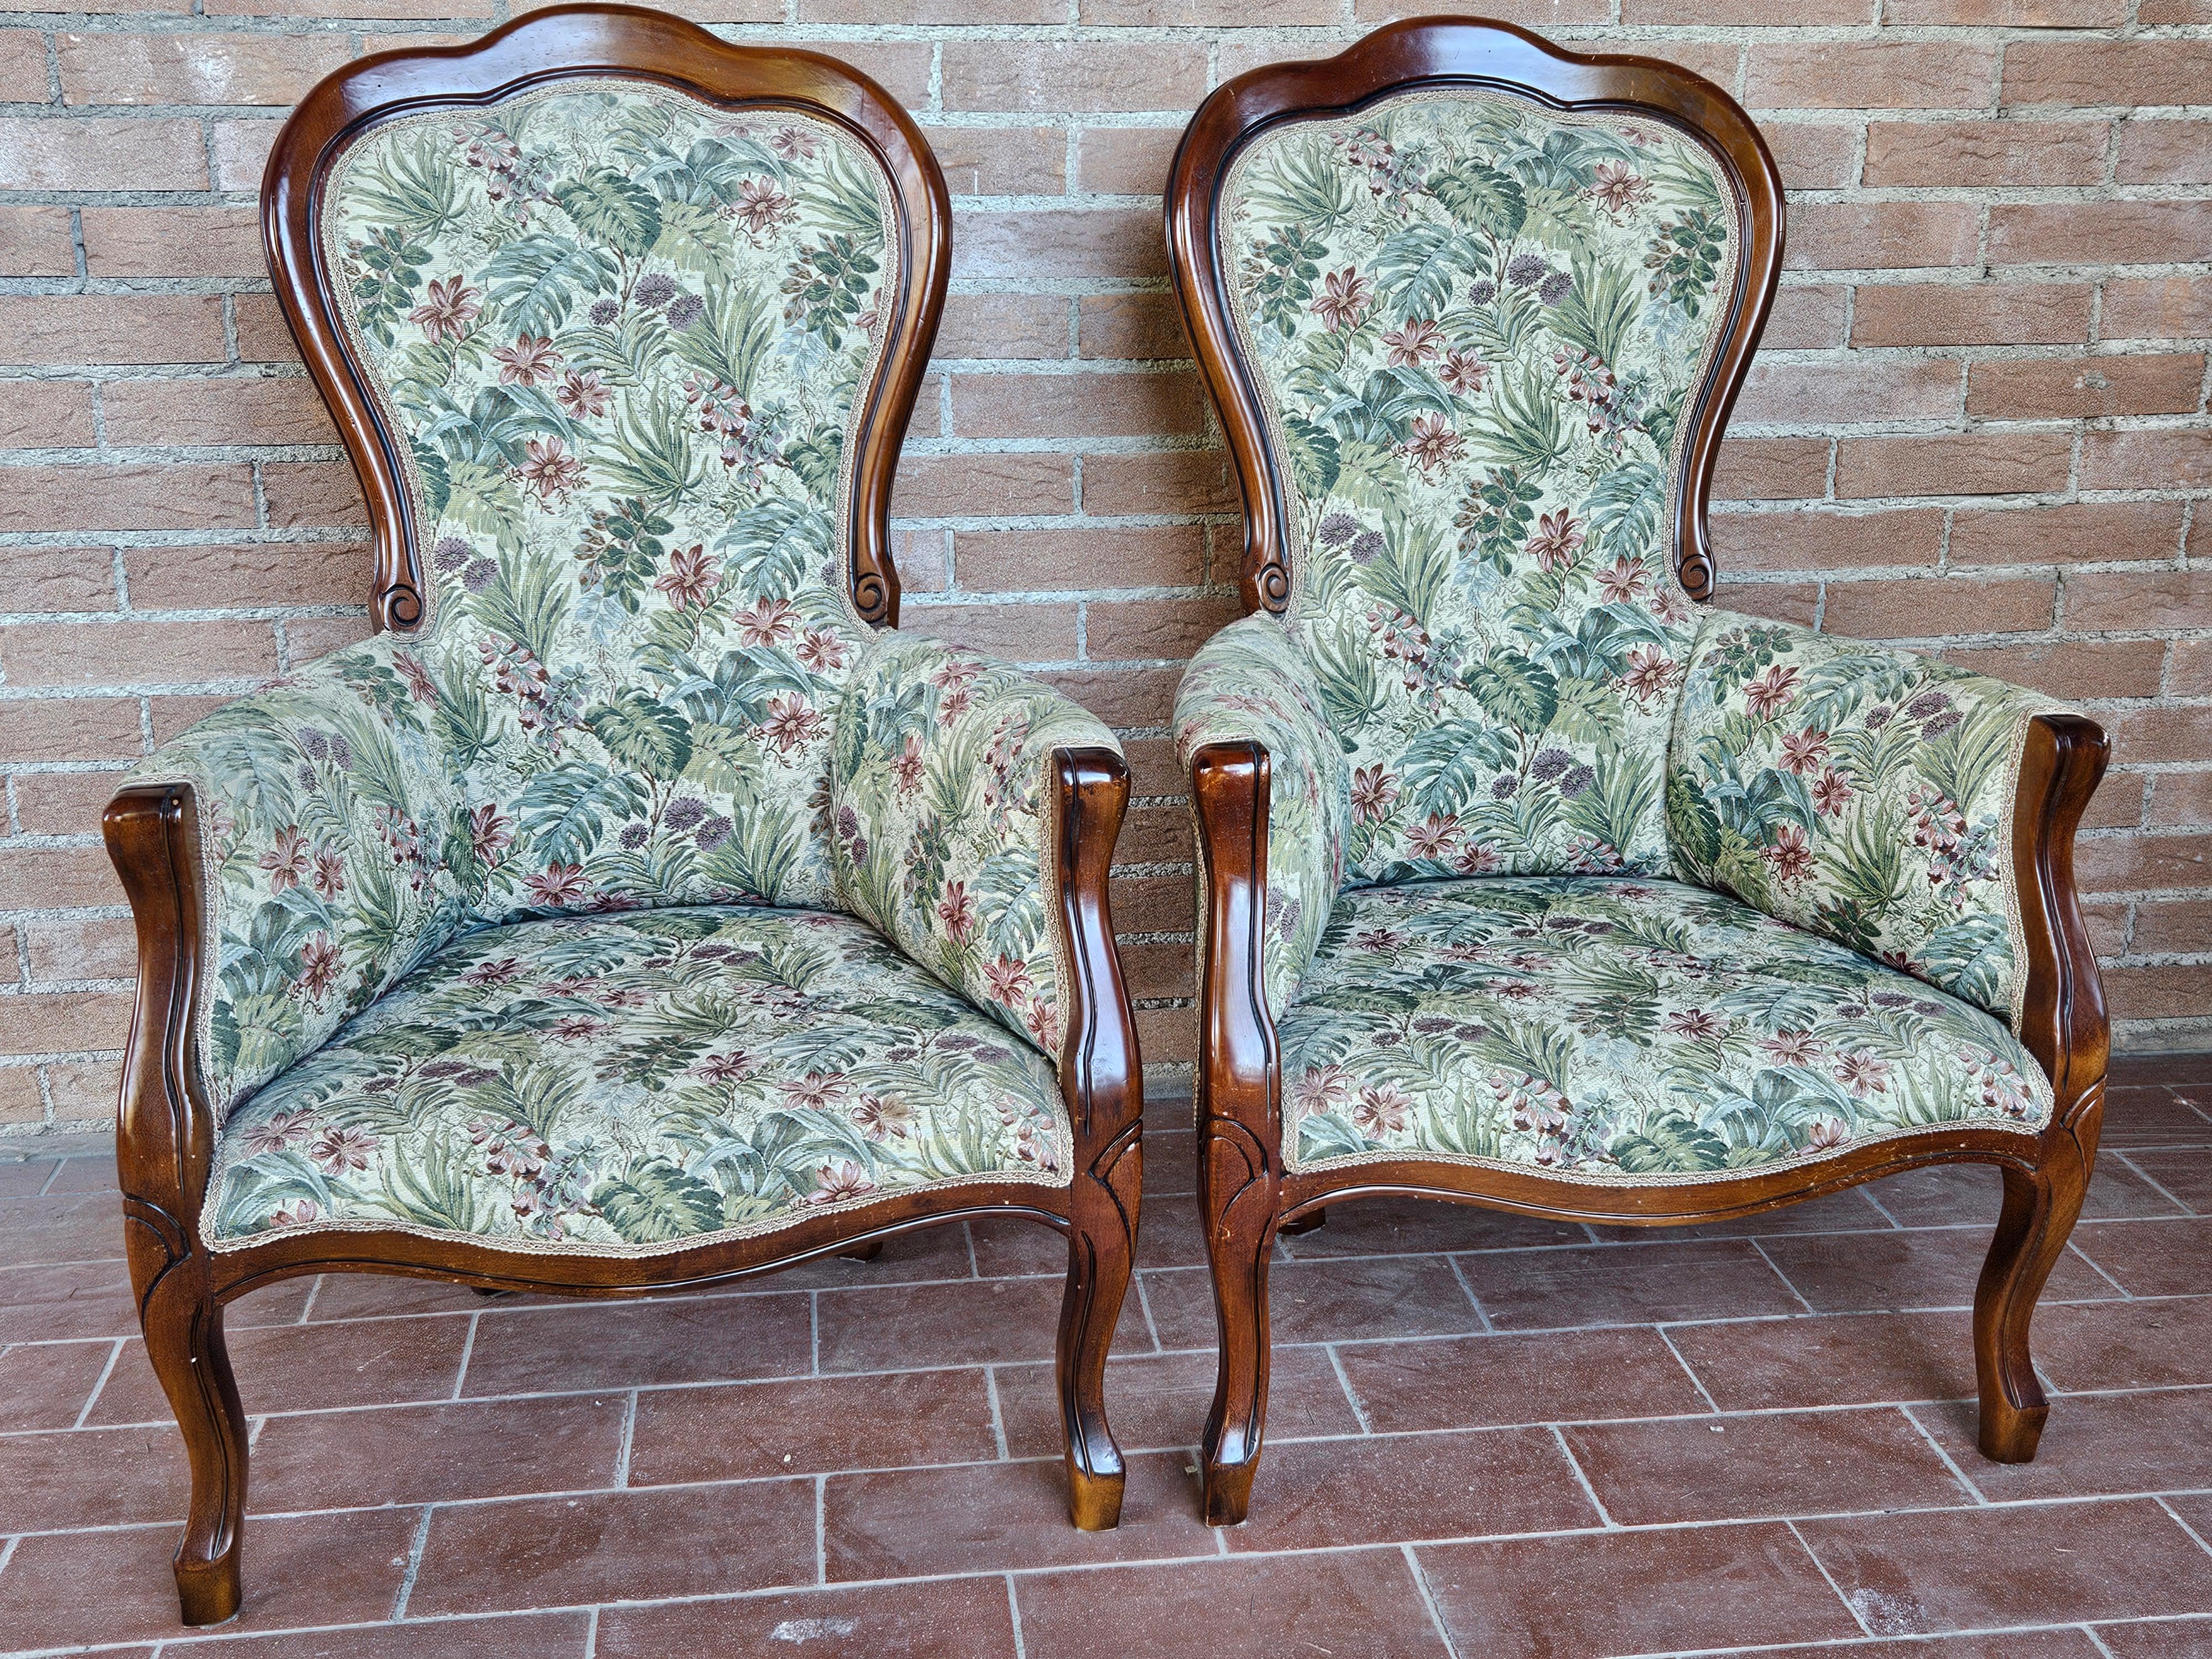 Pair of Louis Philippe-style upholstered armchairs with walnut frame and floral fabric.

Normal signs of wear due to age and use.
